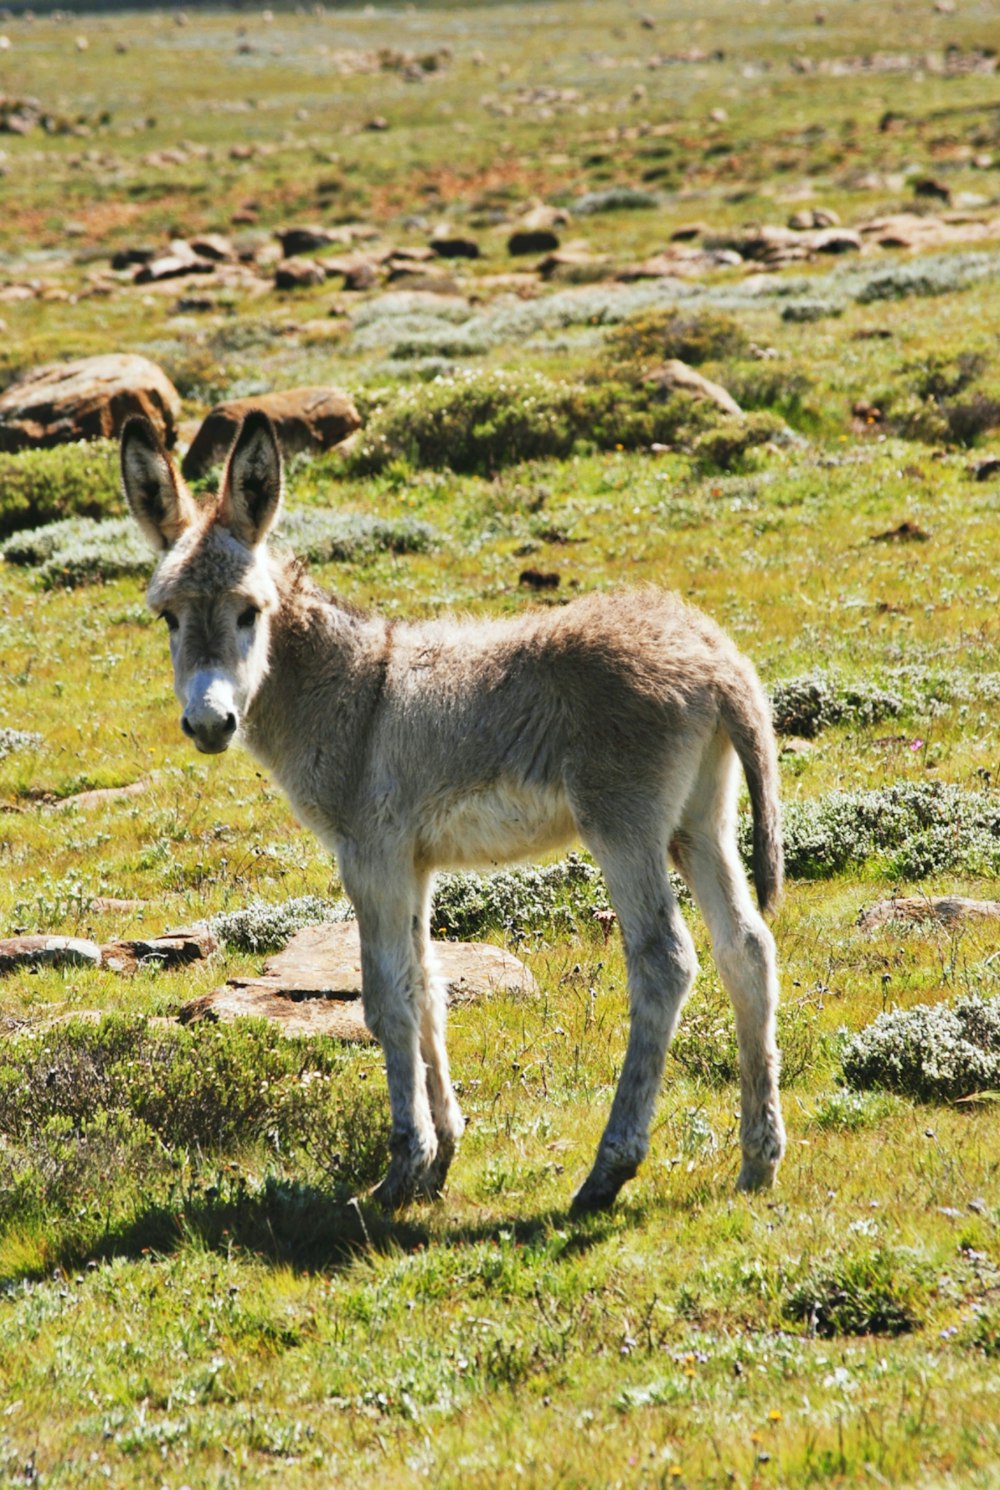 a small donkey standing on a lush green field